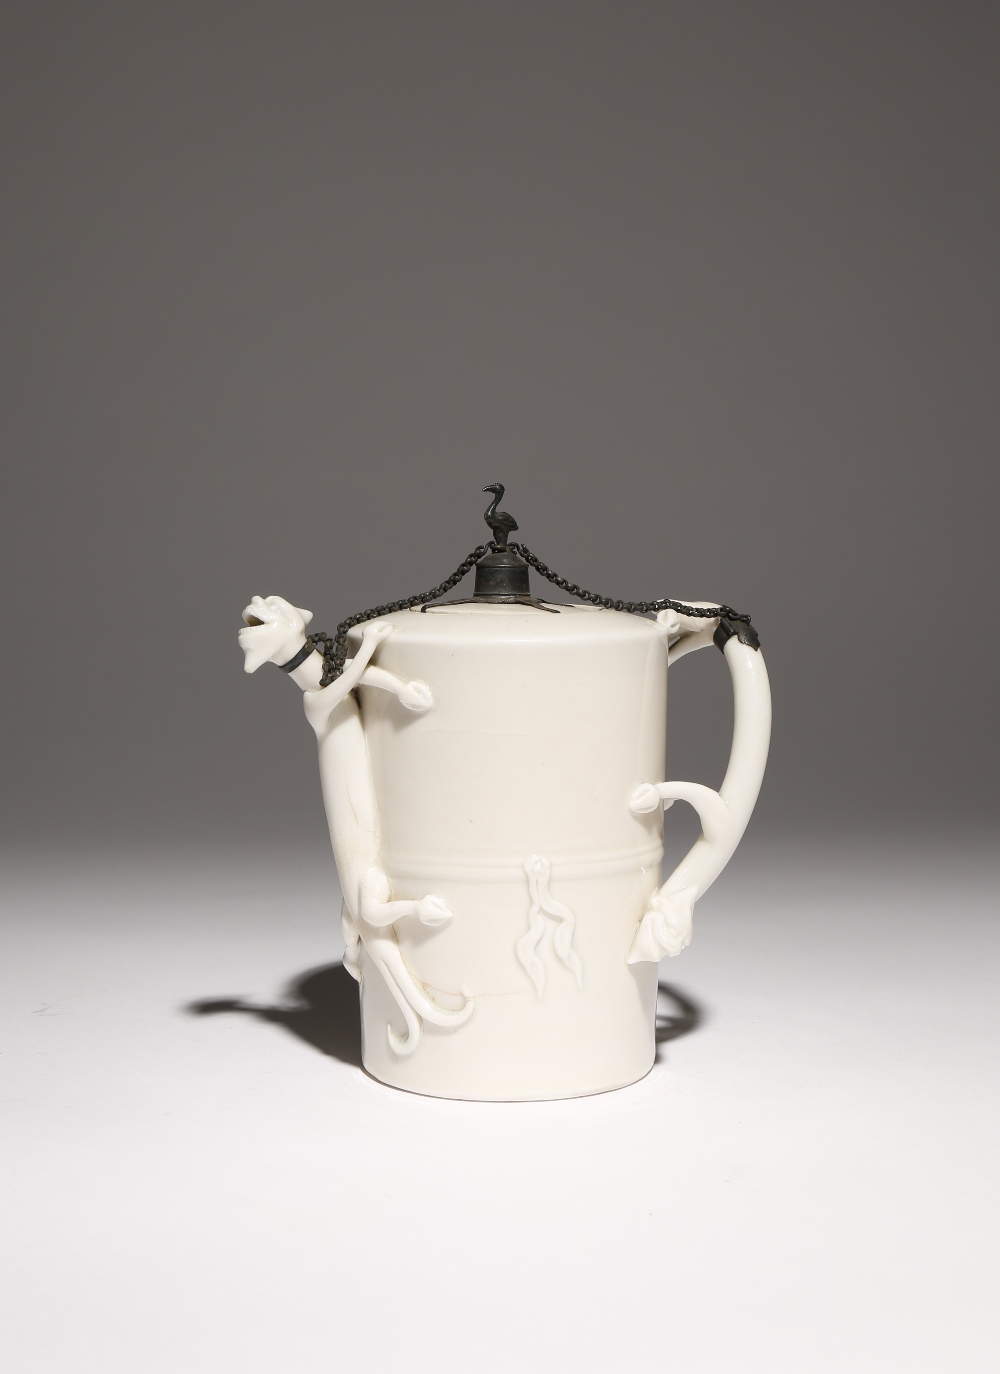 A CHINESE BLANC DE CHINE 'CHILONG' TEAPOT AND COVER KANGXI 1662-1722 Decorated in relief with a